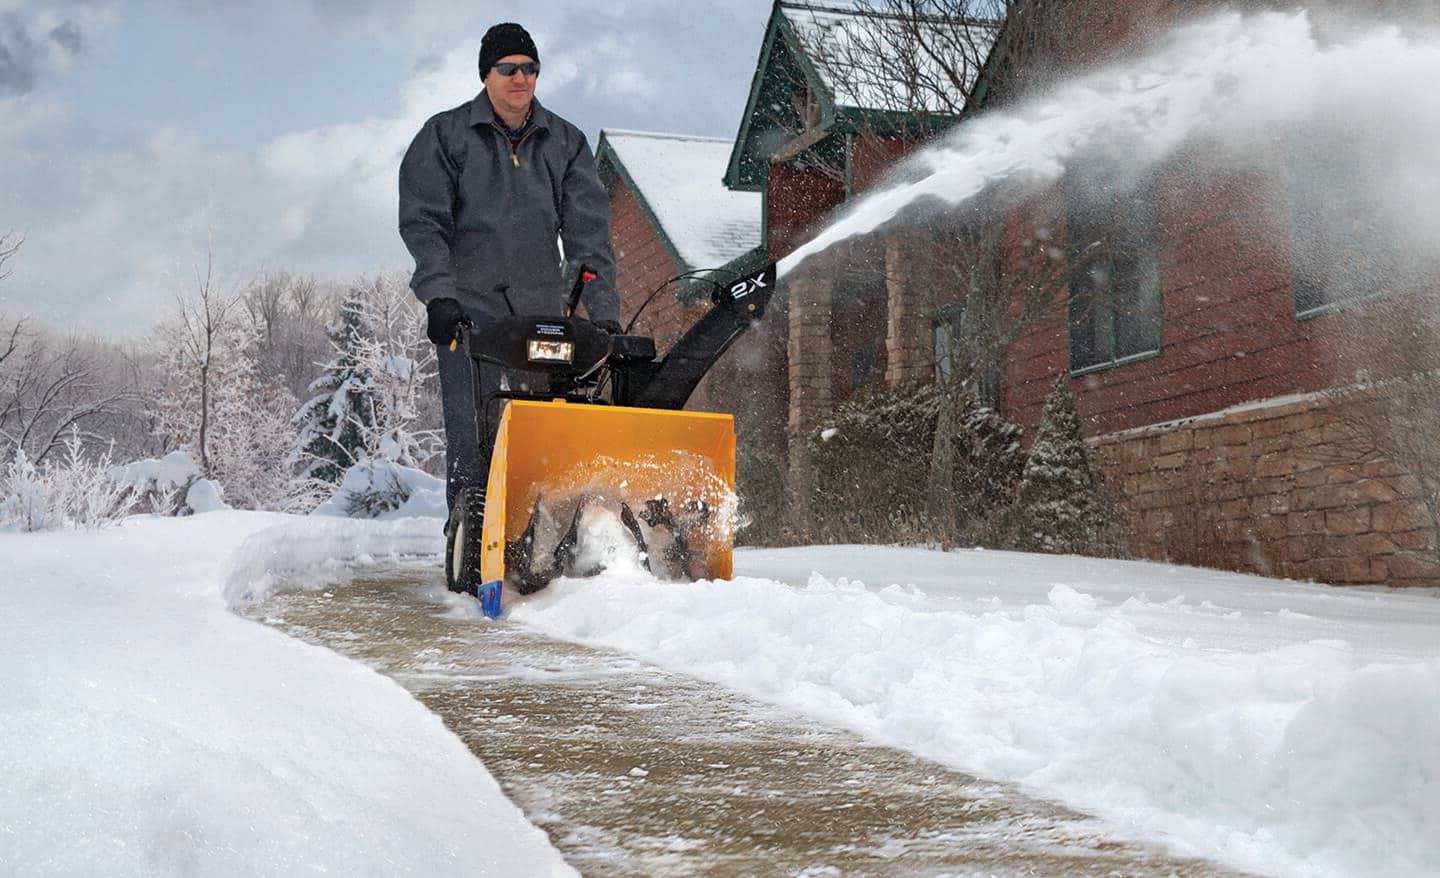  Snow Blowers - Gasoline / Snow Blowers / Snow Removal Tools:  Patio, Lawn & Garden